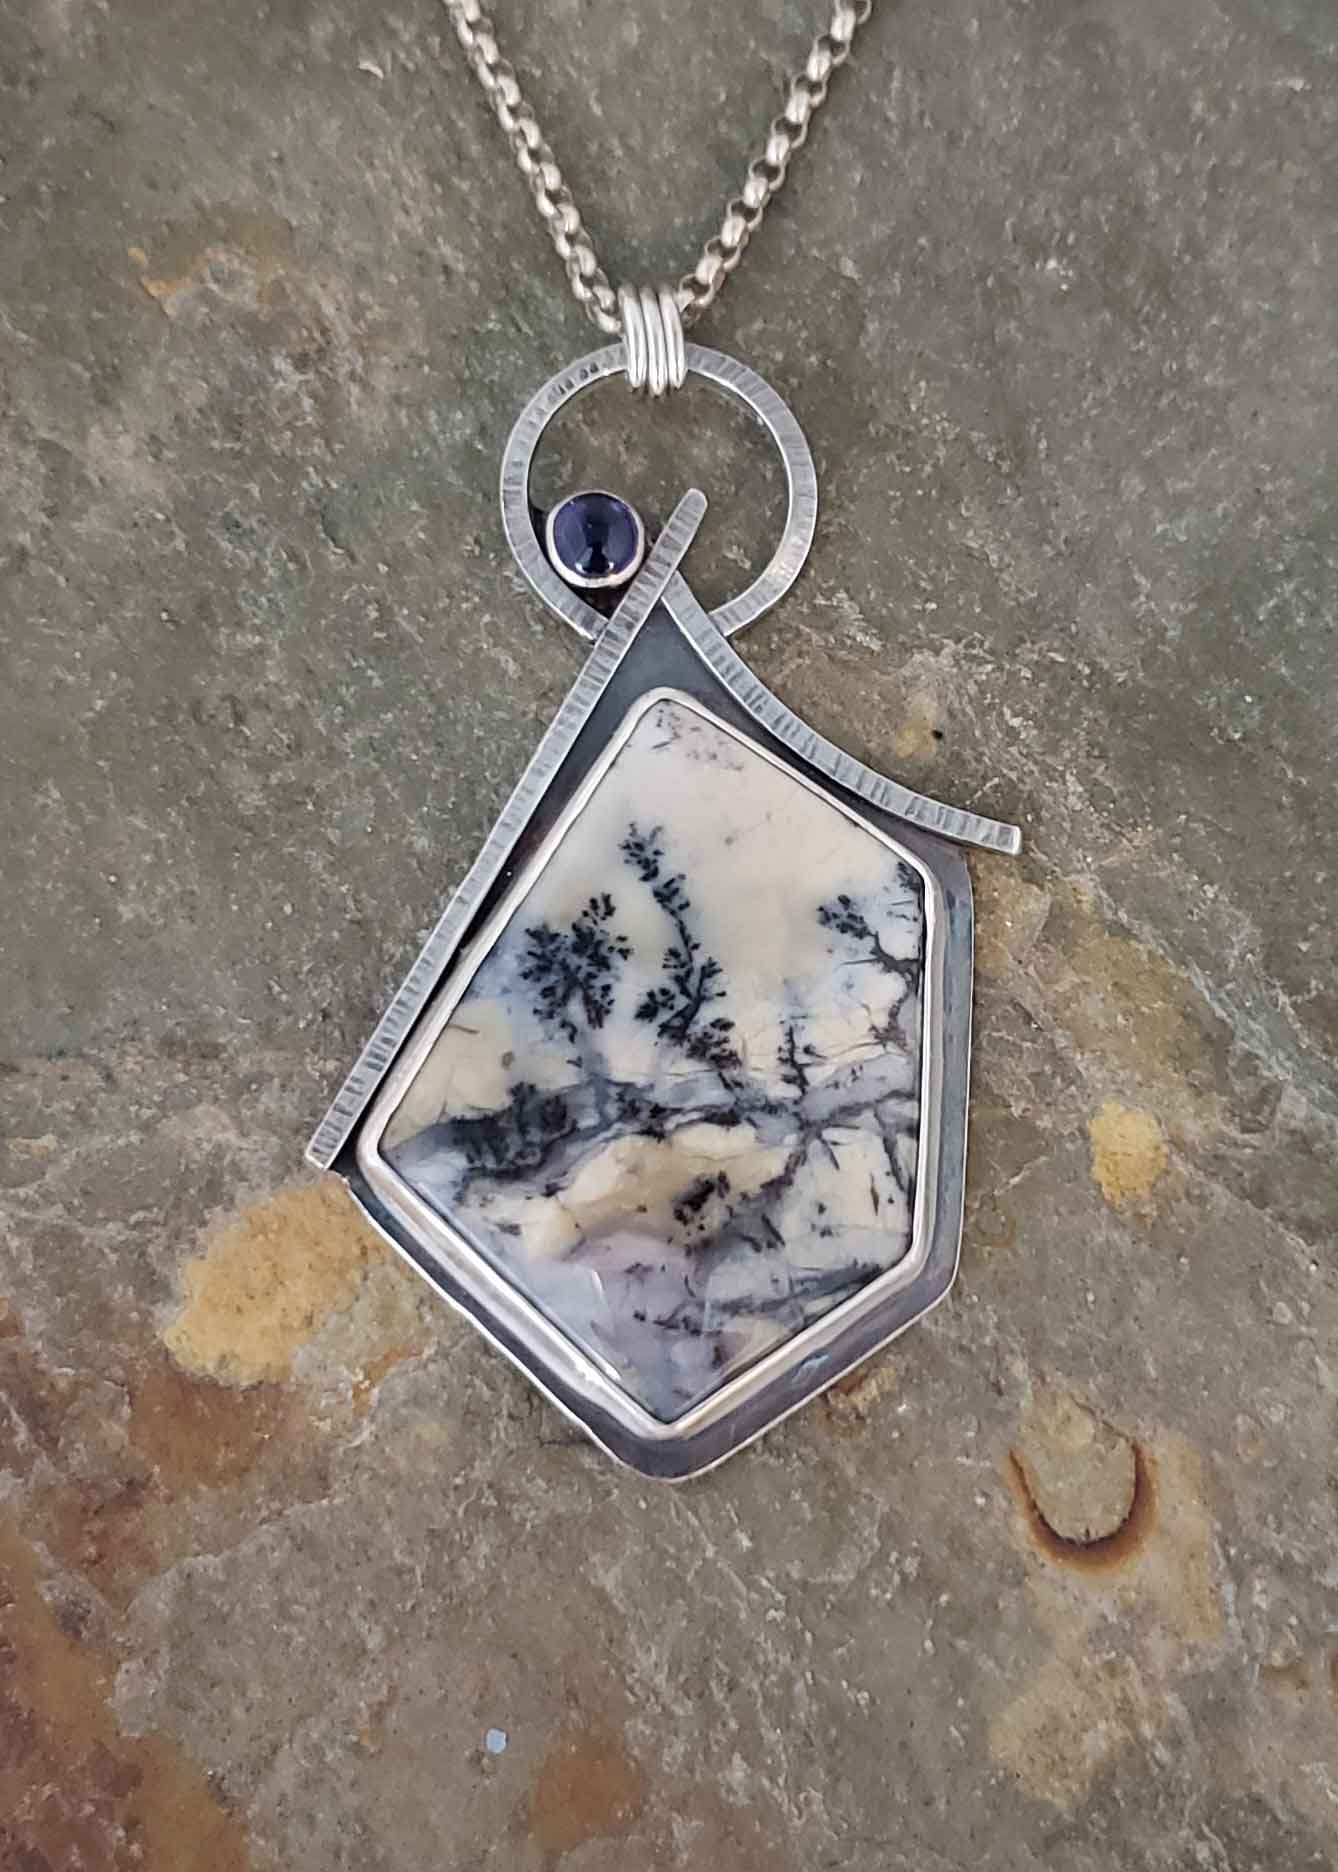 lavenders, blues and greys in this sterling silver pendant of Amethyst Sage and Iolite